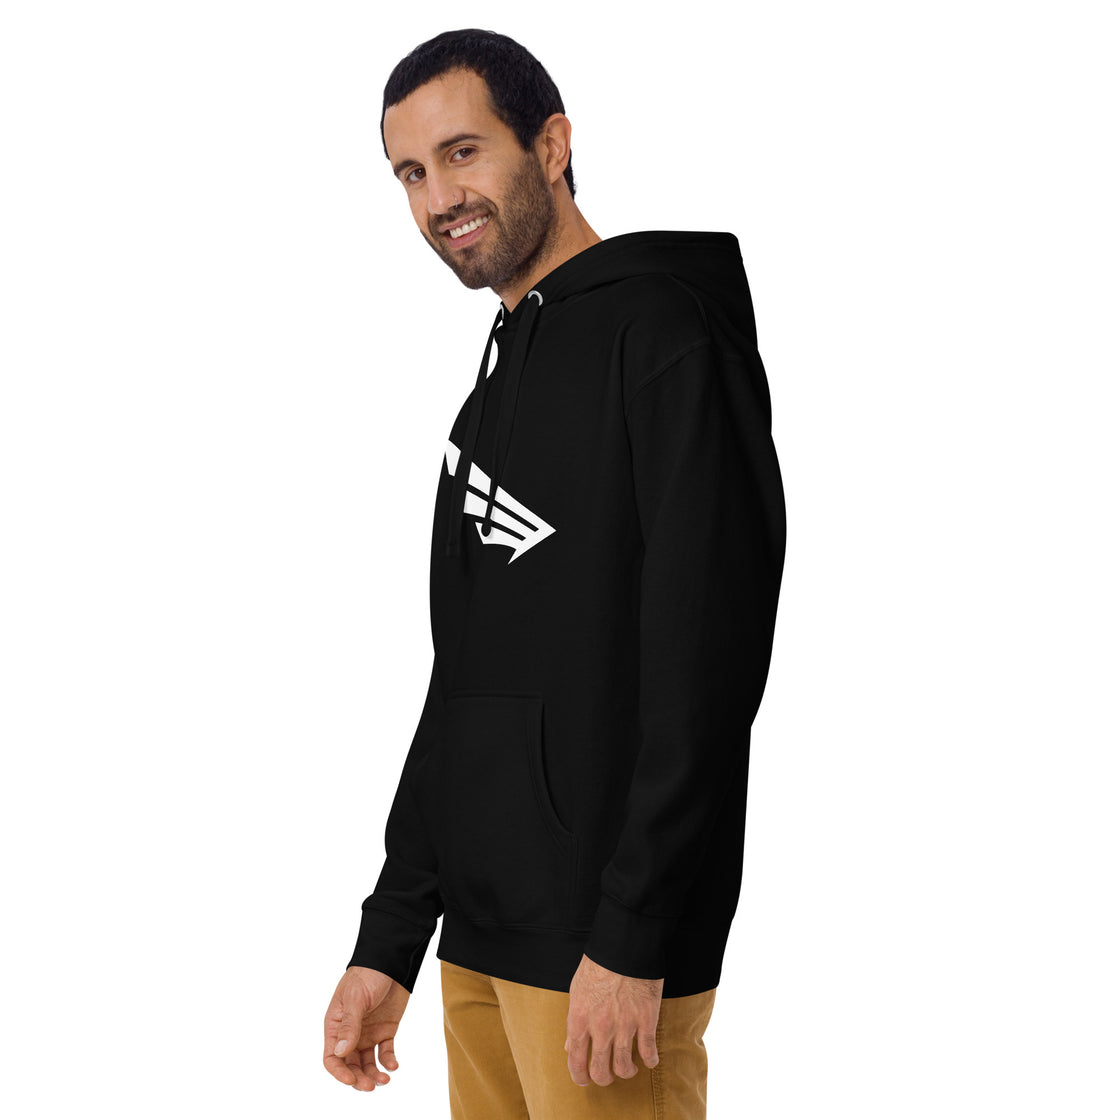 FLY³ Our Premium Hoodie